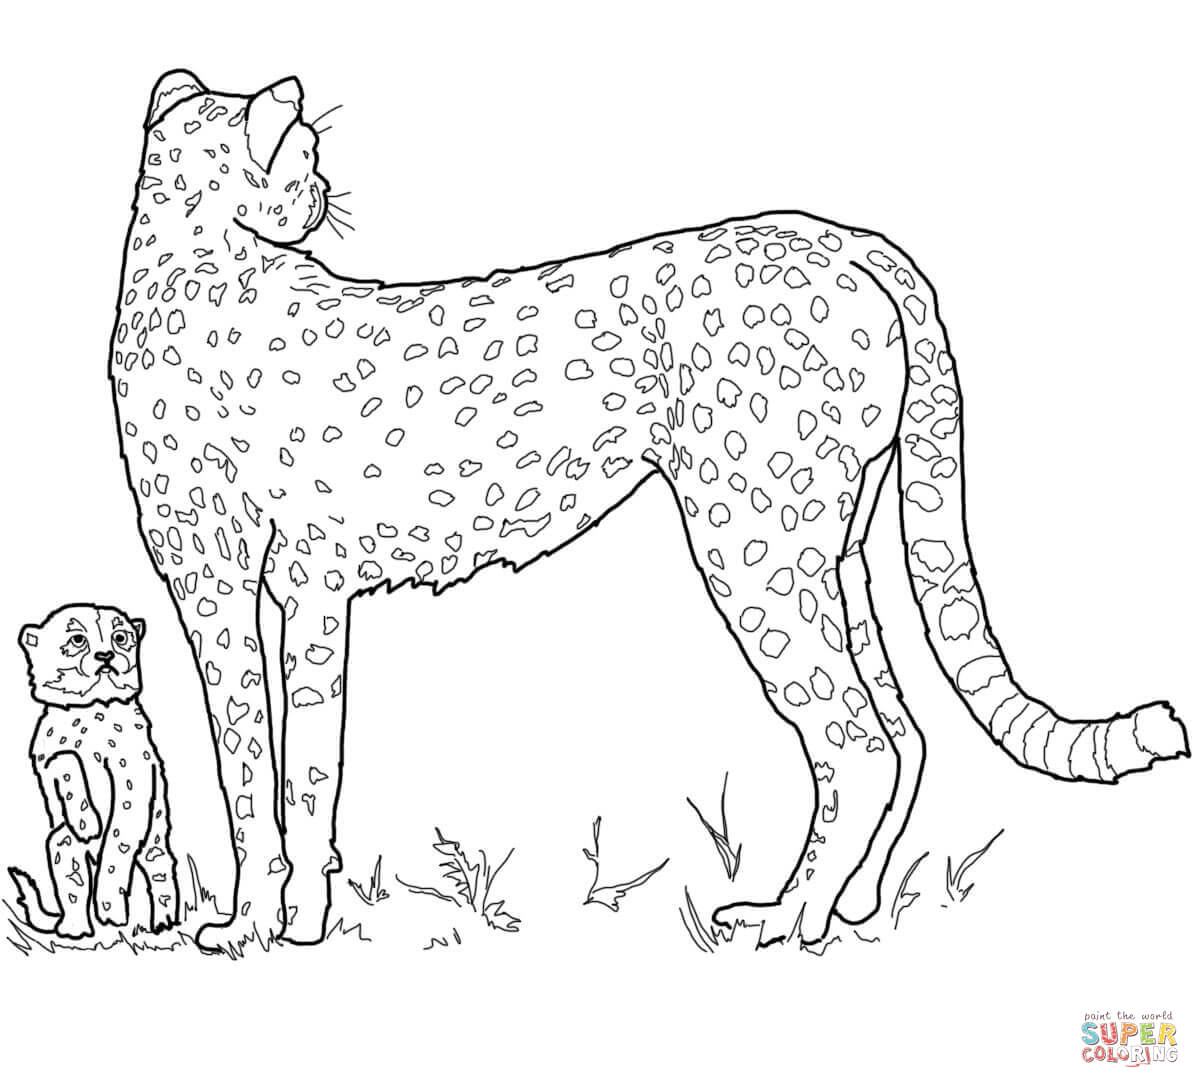 Baby Cheetah And Mother Coloring Page | Free Printable Coloring Pages - Free Printable Cheetah Pictures